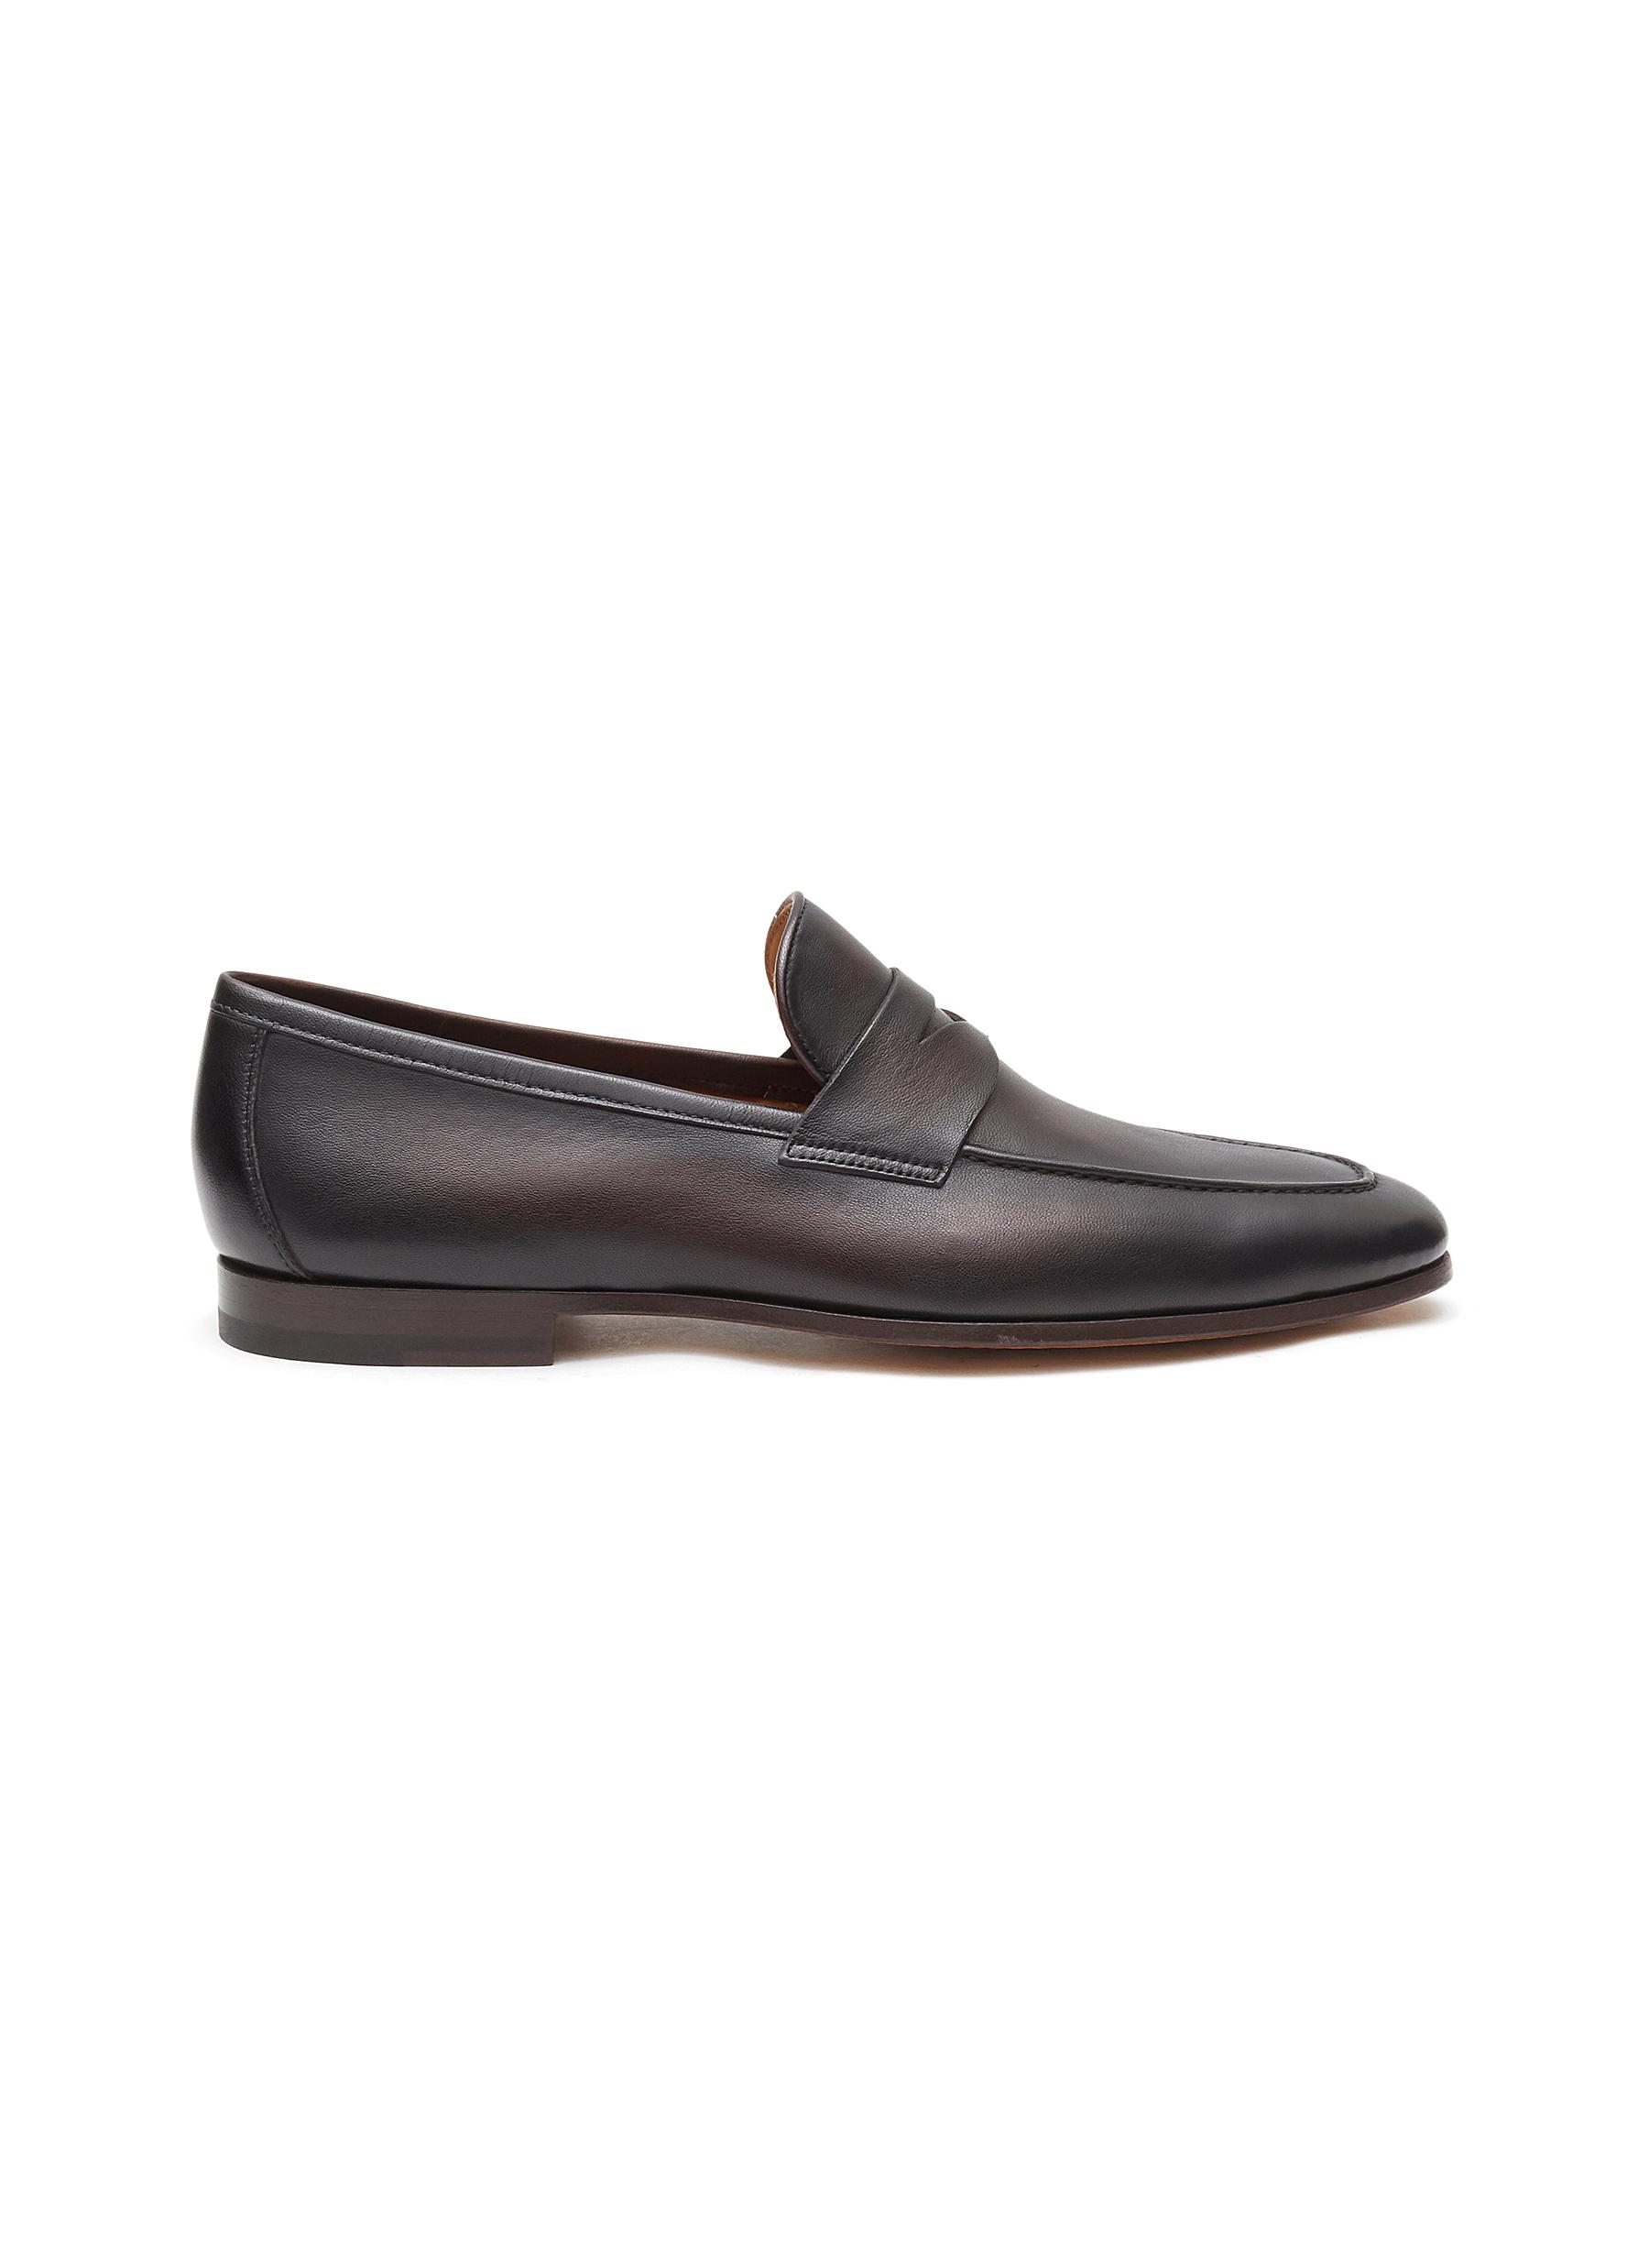 MAGNANNI Apron Toe Leather Penny Loafers